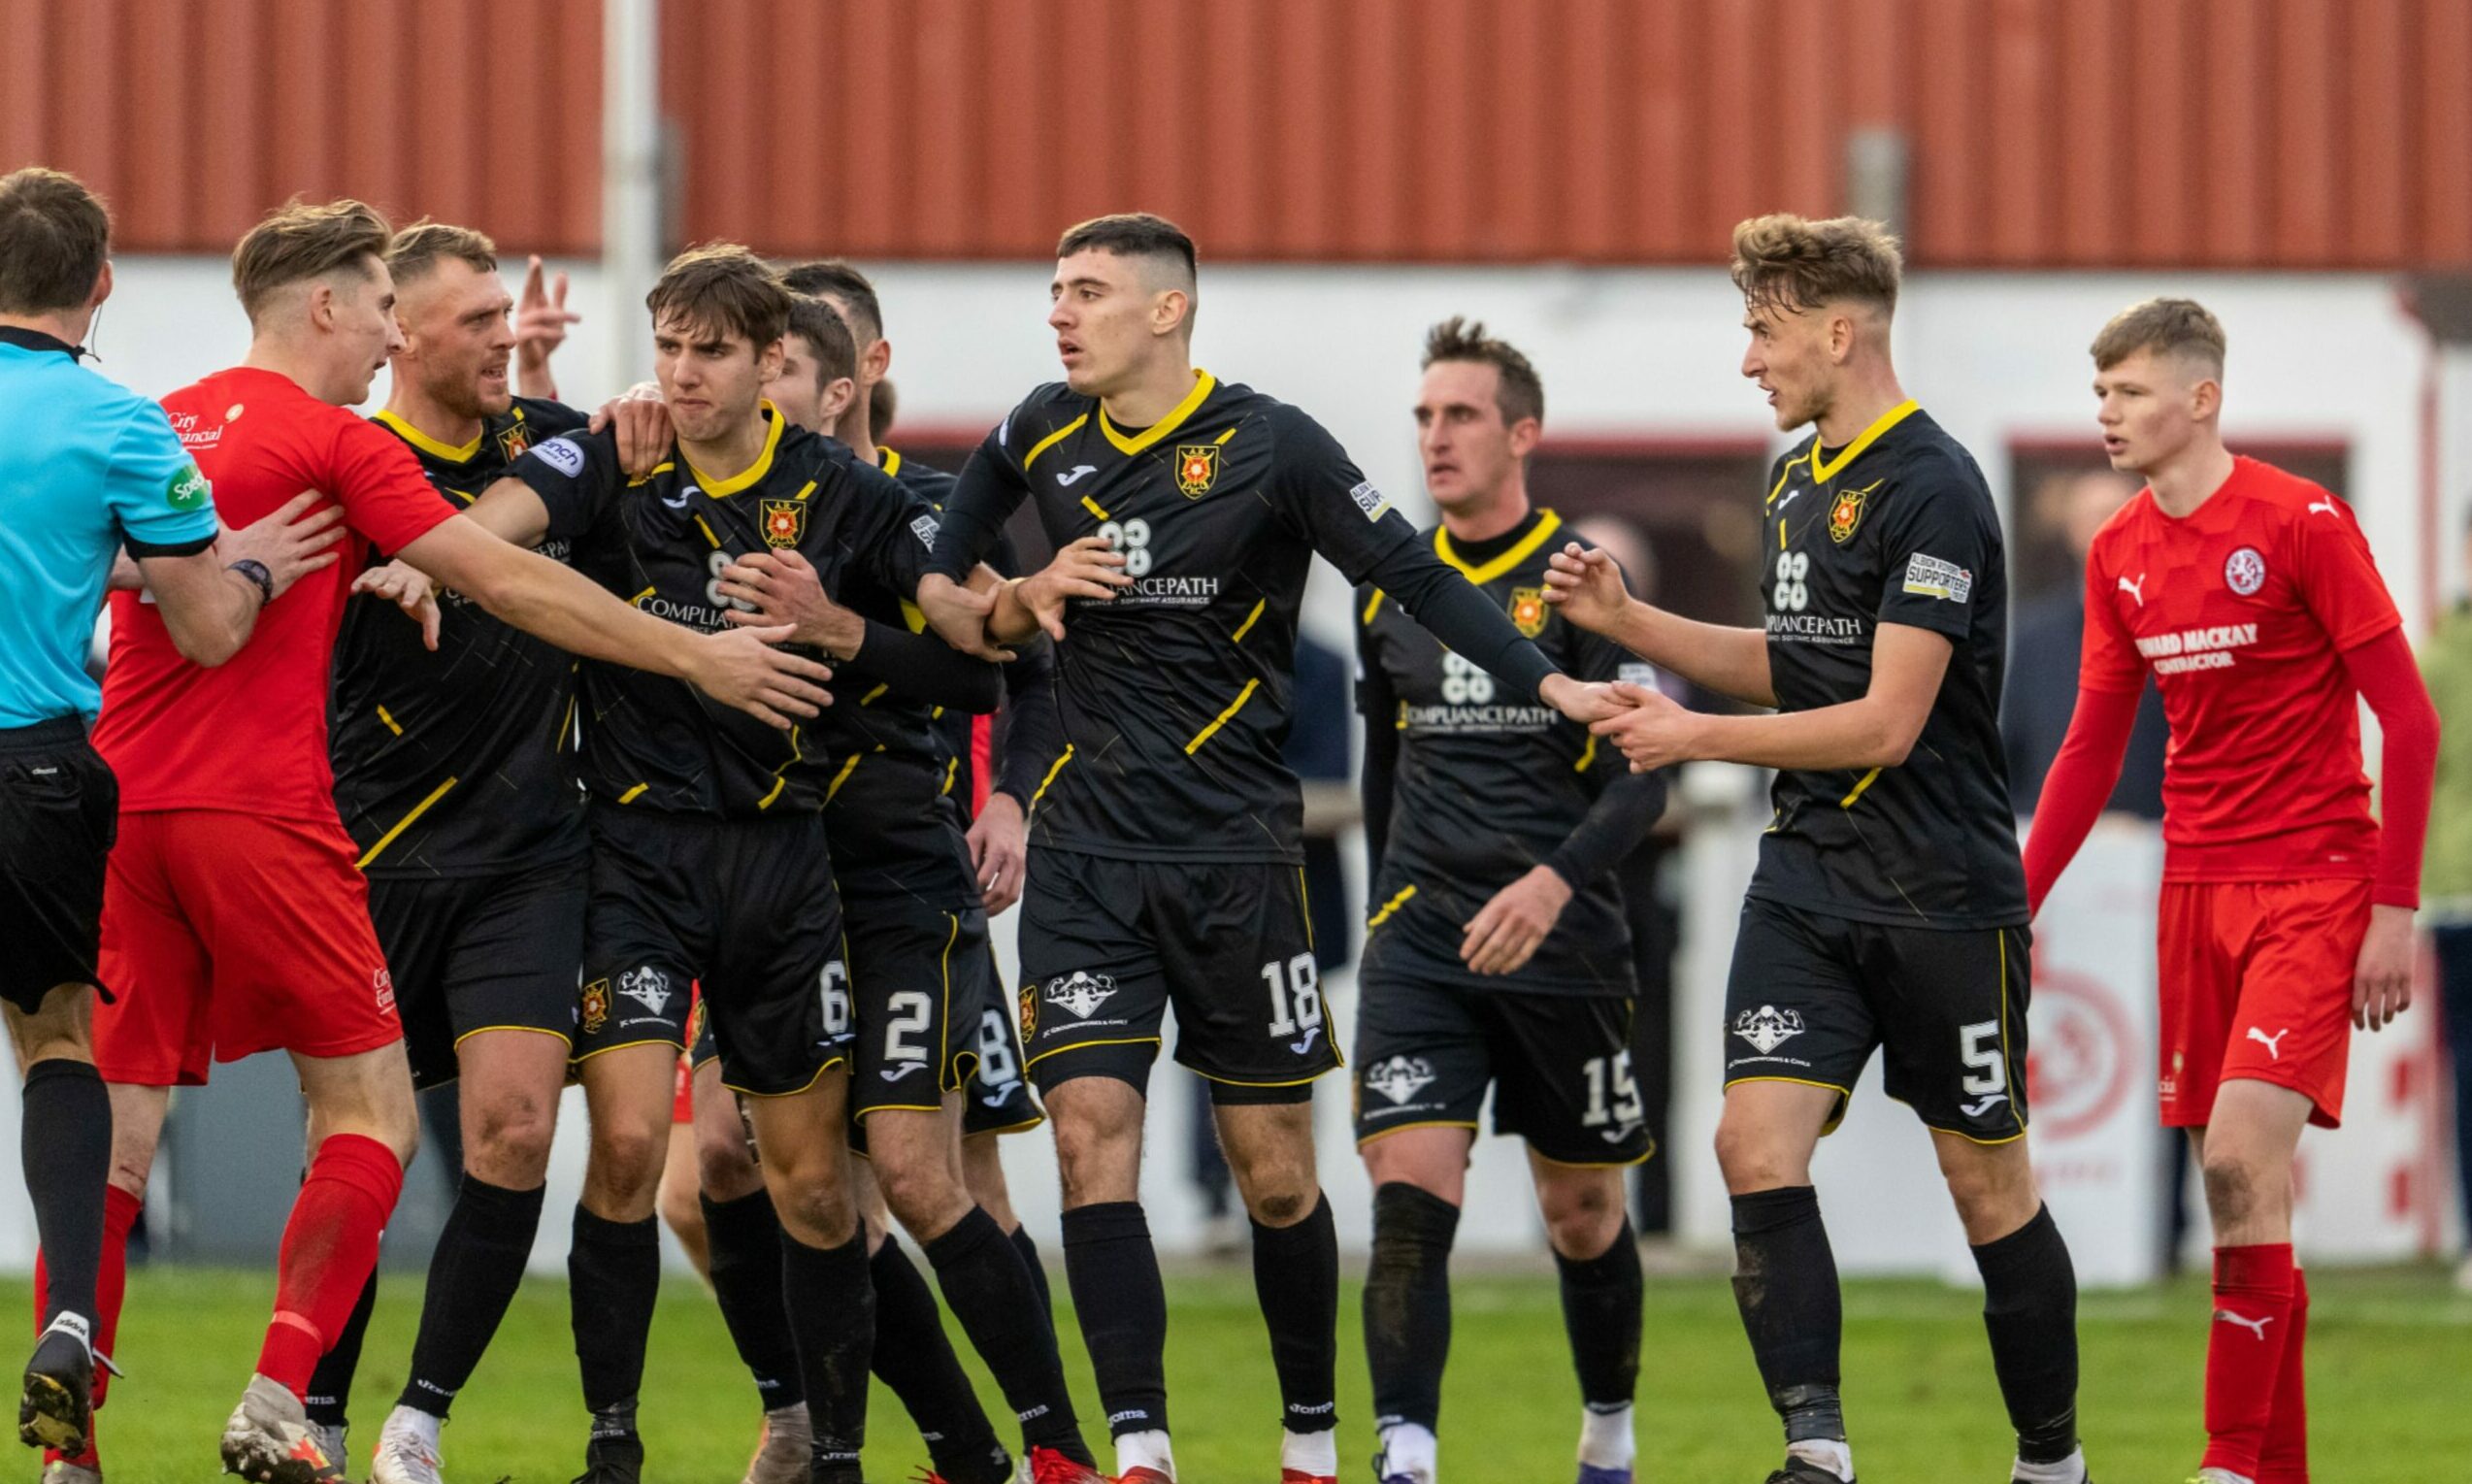 SCOTTISH CUP BRORA RANGERS ALBION ROVERS 23OCT2021  32 41171639 3hl6neyul scaled e1635068718332.